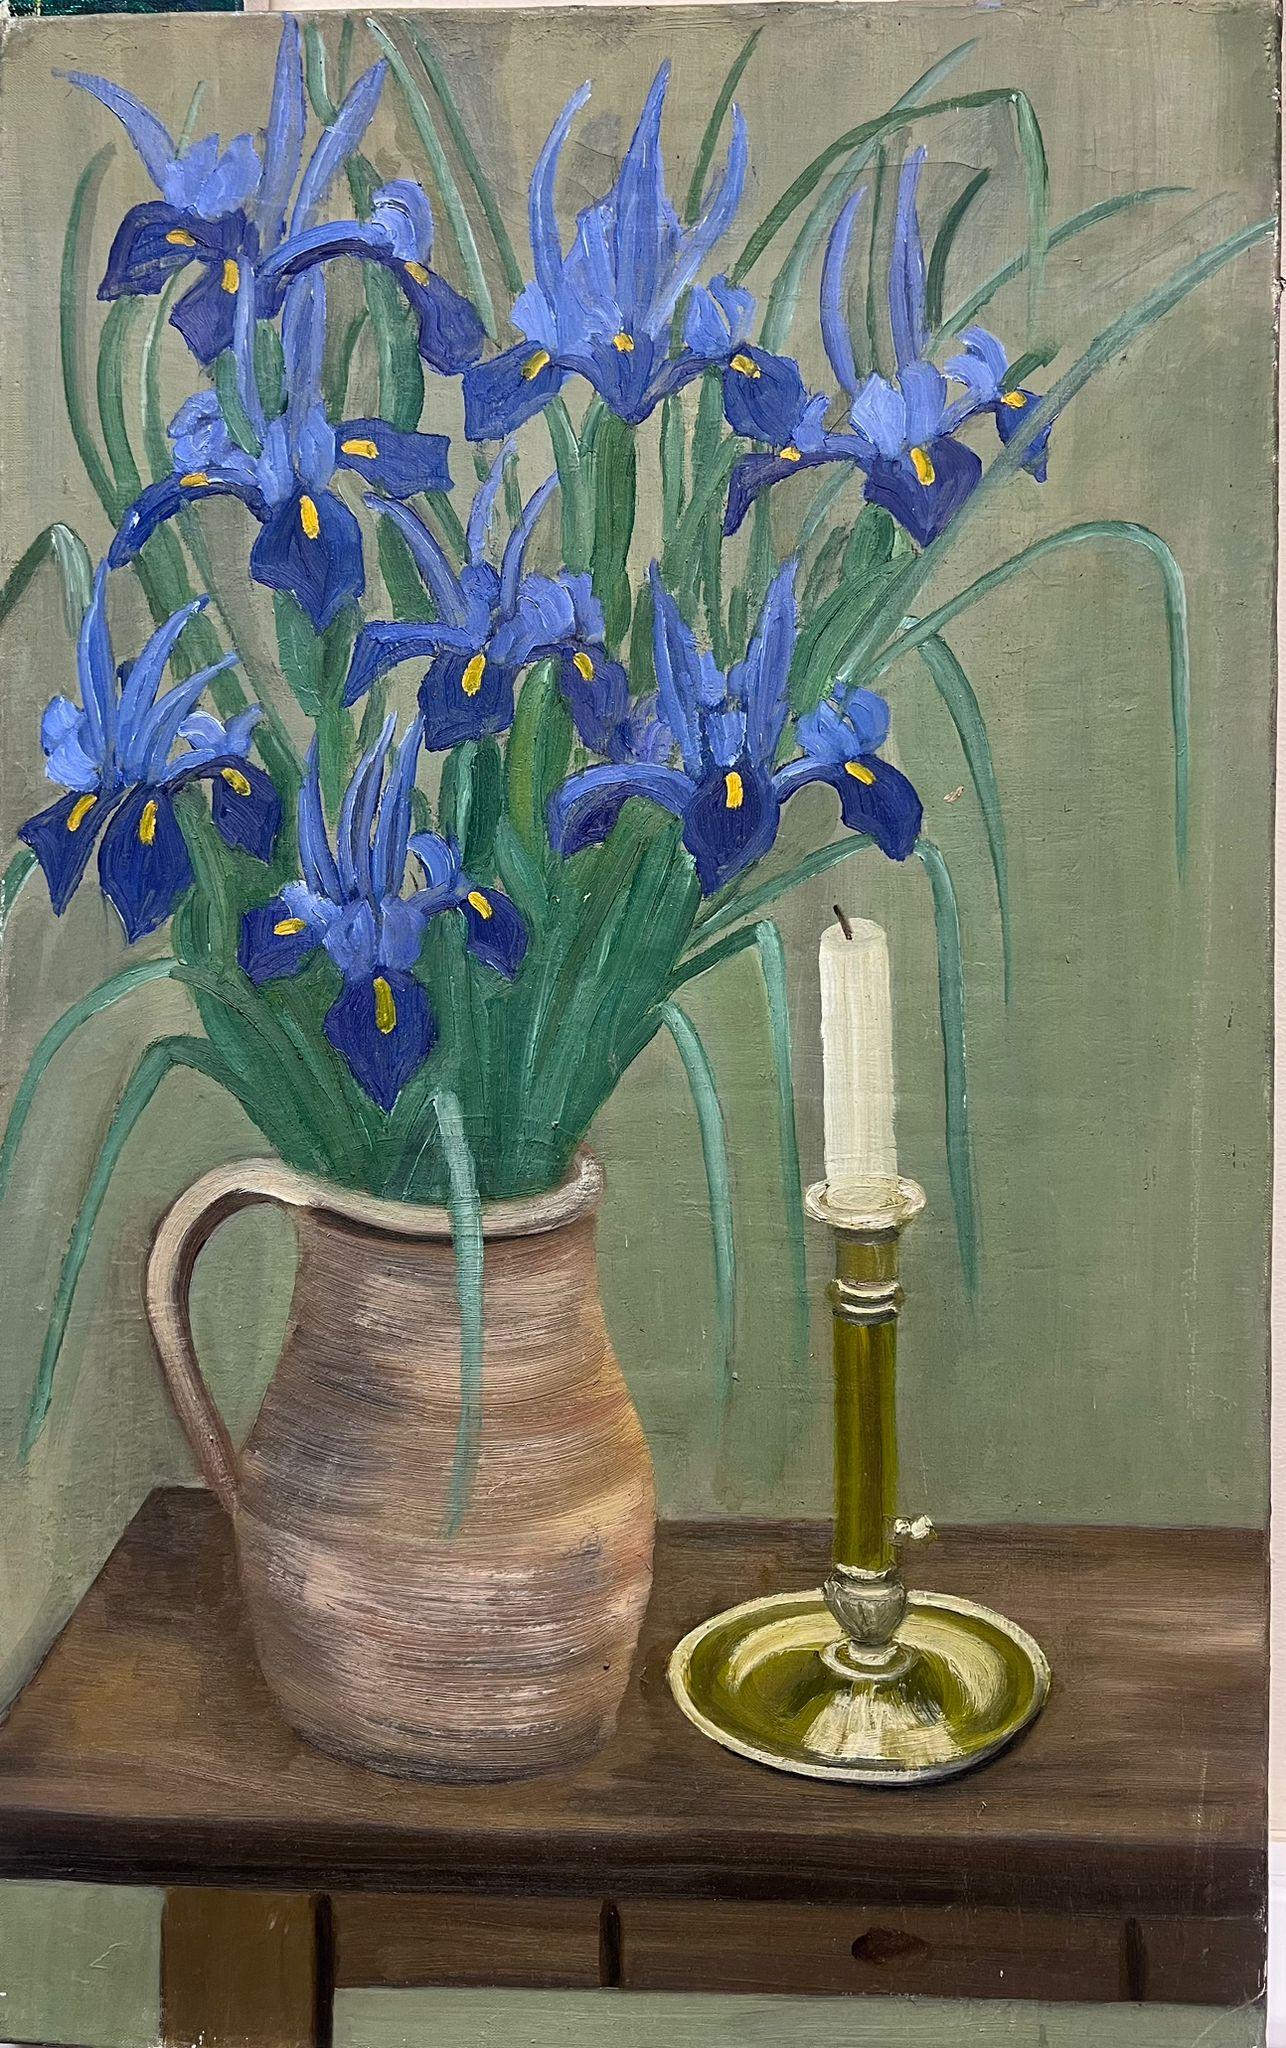 Mid 20th Century French Oil Painting Iris Flowers in Vase Still Life Interior - Gray Still-Life Painting by Louise Alix